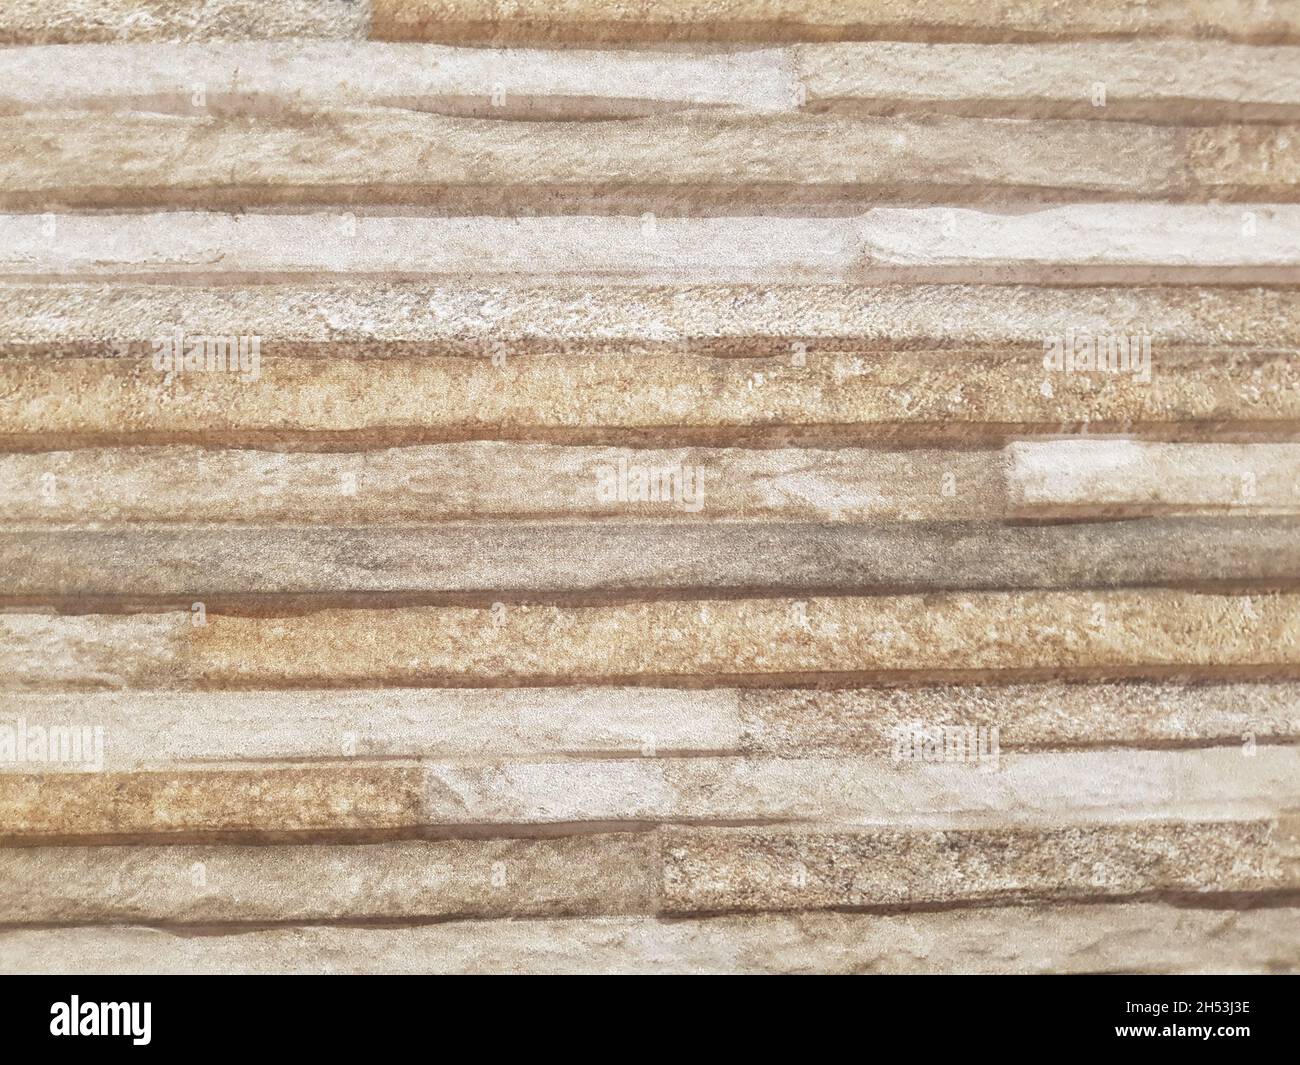 Background photo, interior stone wall texture, with horizontal lines. Top view, full screen. Stock Photo